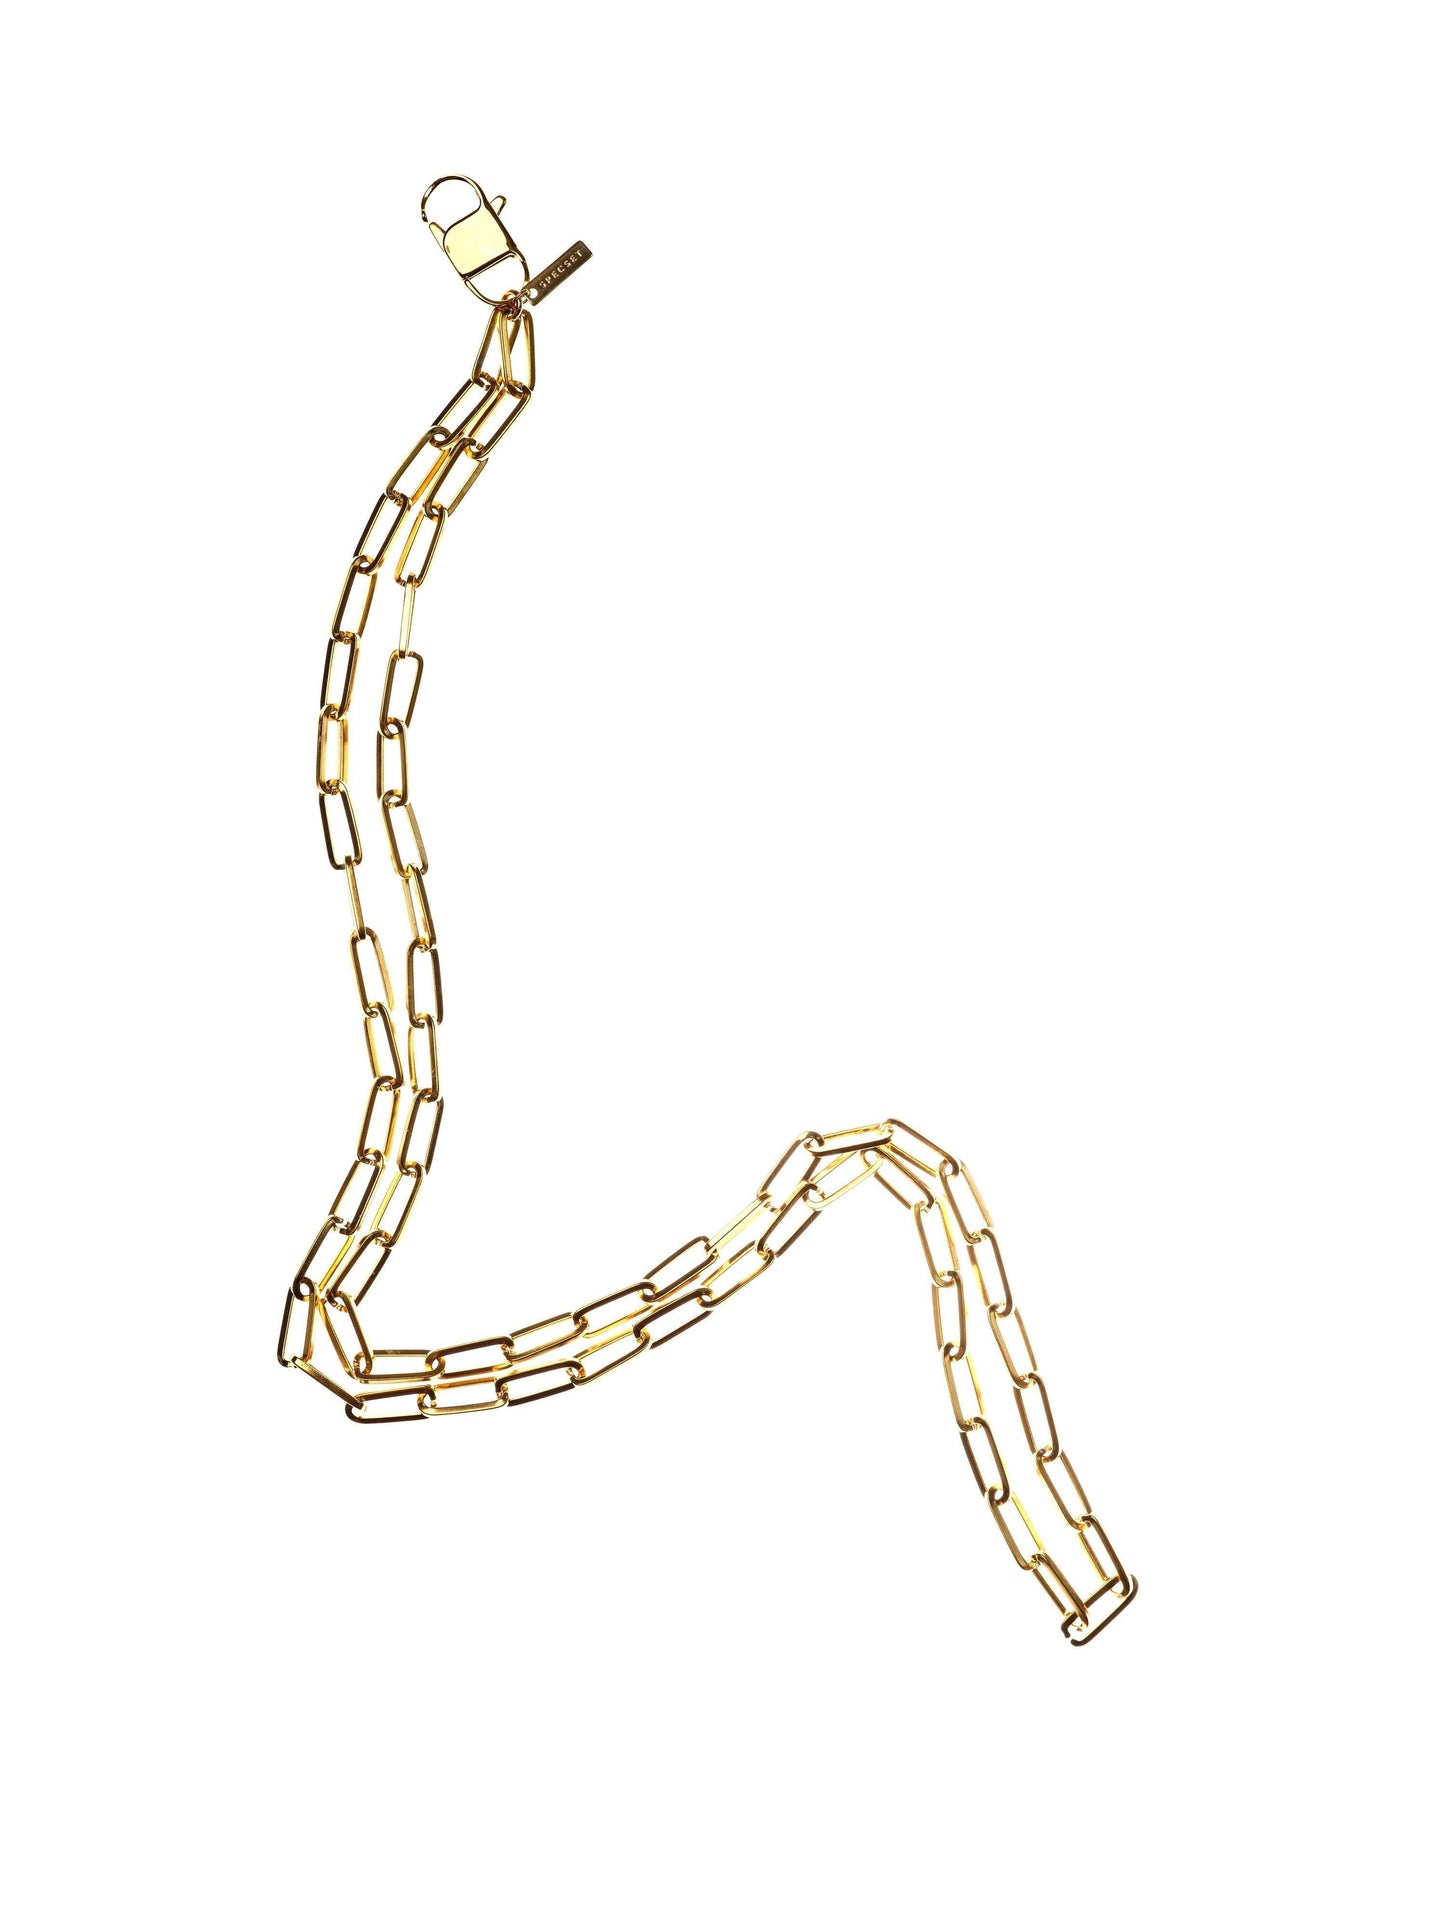 OBLONGY - GOLD Neck Phone Chain & Lanyard | SPECSET